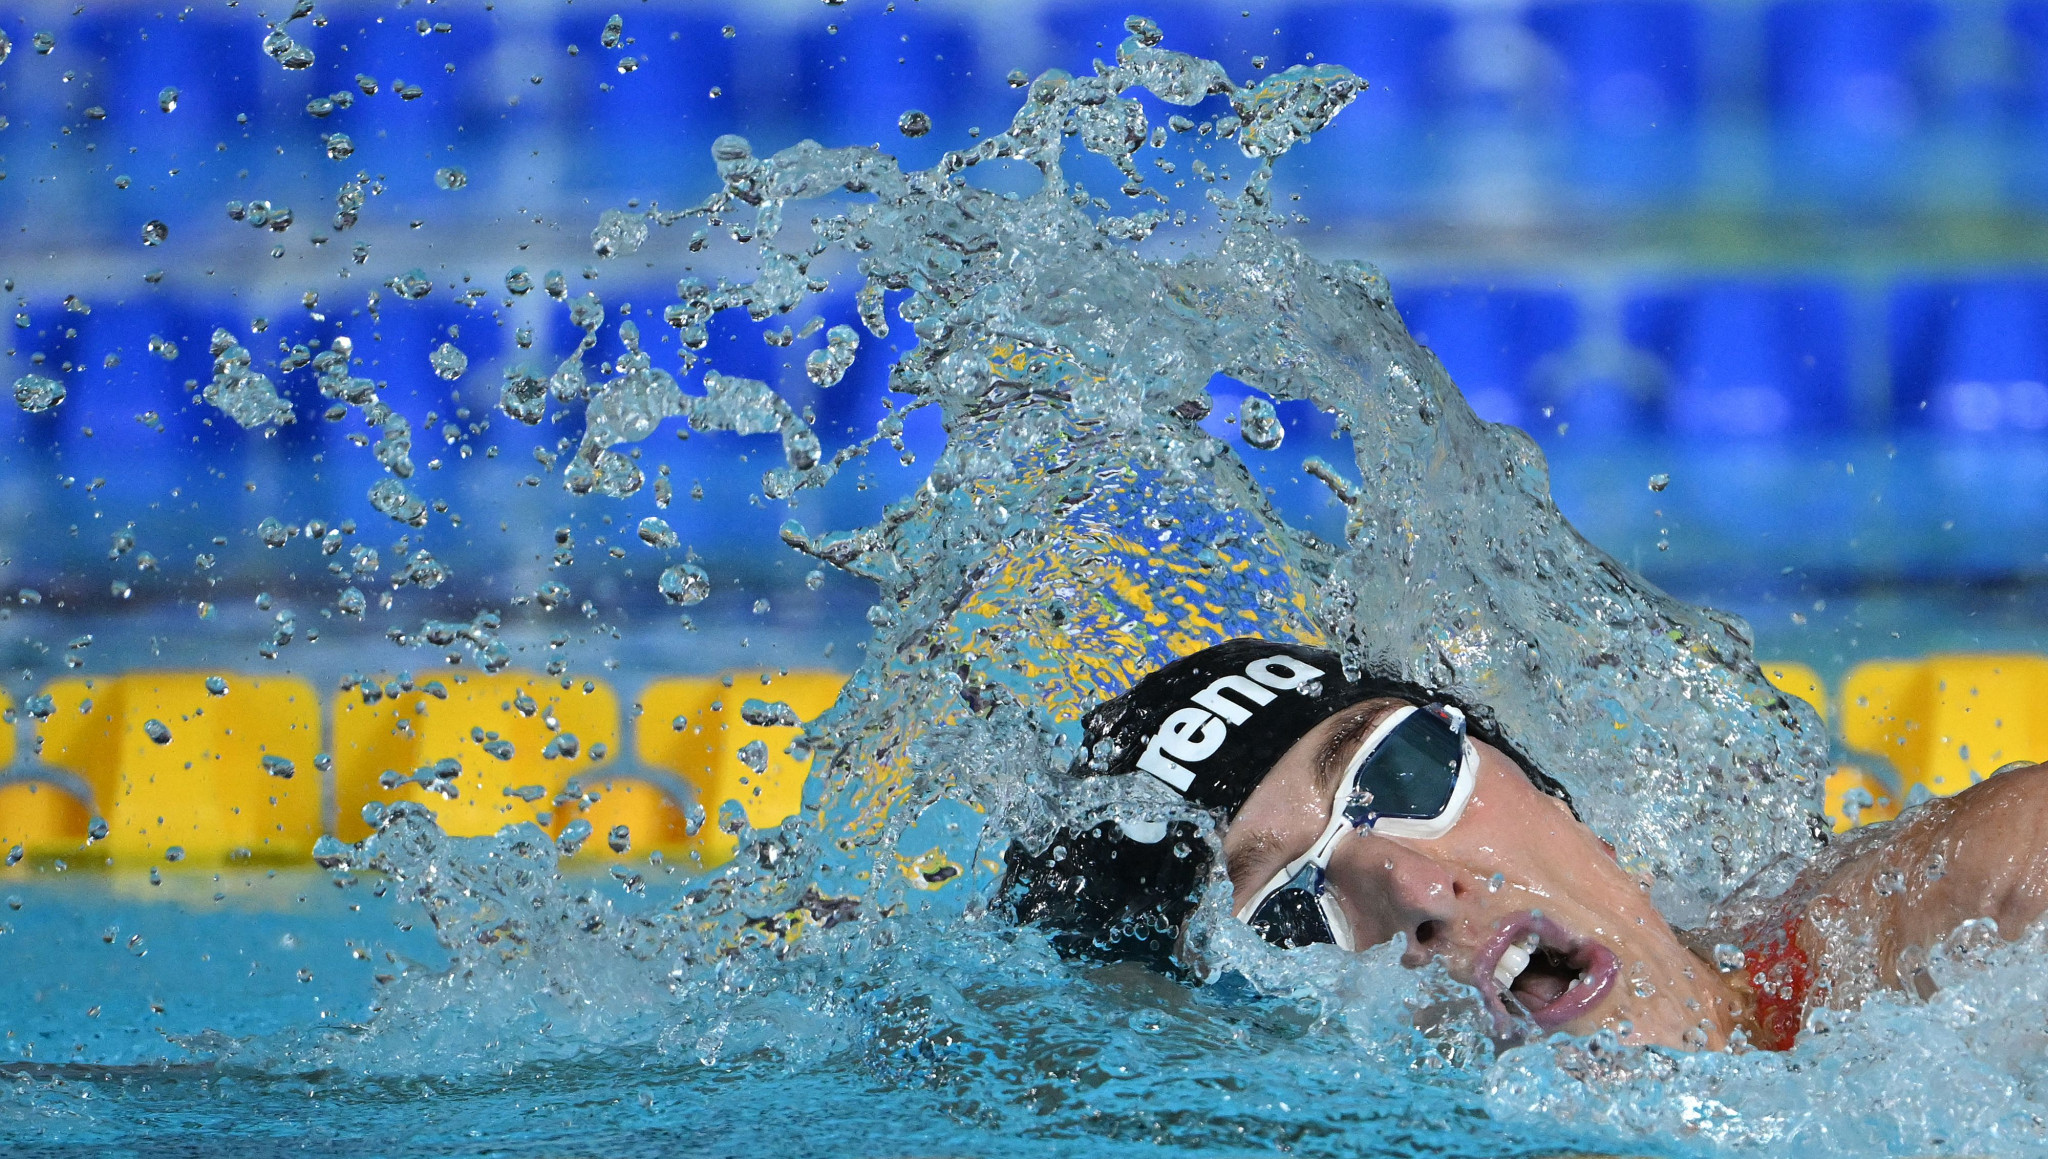 In the pool, Bethany Firth secured Northern Ireland's first gold medal of Birmingham 2022 ©Getty Images